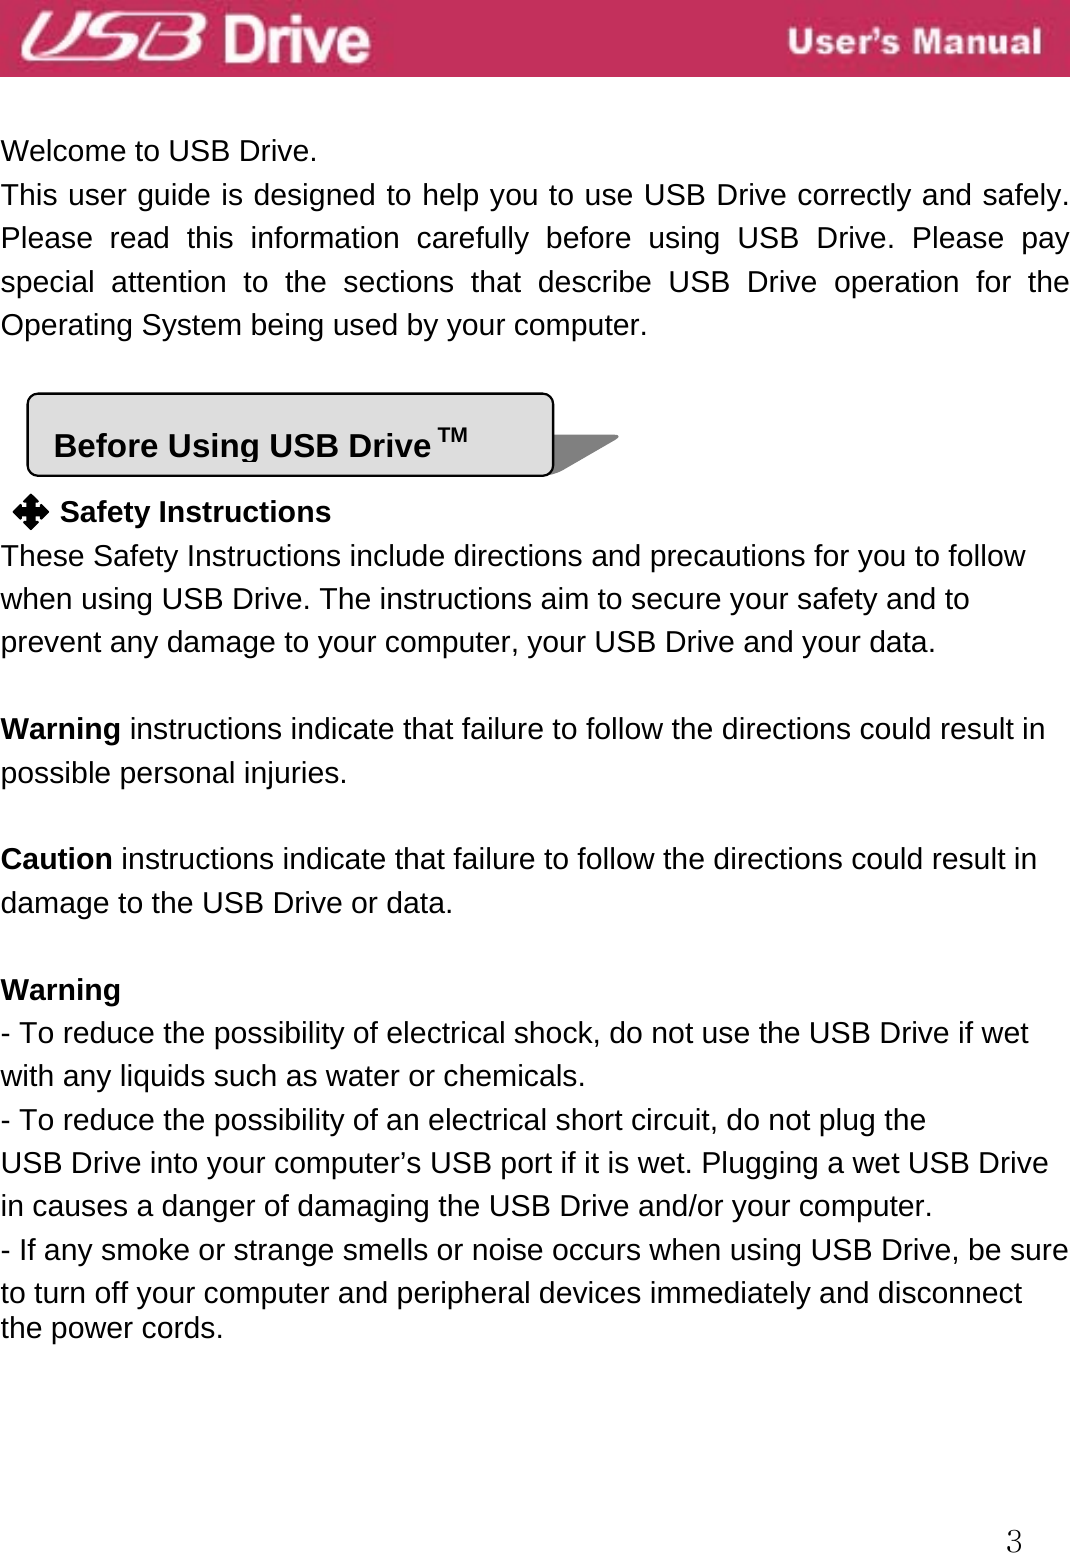  3   Welcome to USB Drive. This user guide is designed to help you to use USB Drive correctly and safely. Please read this information carefully before using USB Drive. Please pay special attention to the sections that describe USB Drive operation for the Operating System being used by your computer.     Safety Instructions These Safety Instructions include directions and precautions for you to follow when using USB Drive. The instructions aim to secure your safety and to prevent any damage to your computer, your USB Drive and your data.      Warning instructions indicate that failure to follow the directions could result in possible personal injuries.   Caution instructions indicate that failure to follow the directions could result in damage to the USB Drive or data.  Warning - To reduce the possibility of electrical shock, do not use the USB Drive if wet with any liquids such as water or chemicals. - To reduce the possibility of an electrical short circuit, do not plug the USB Drive into your computer’s USB port if it is wet. Plugging a wet USB Drive in causes a danger of damaging the USB Drive and/or your computer. - If any smoke or strange smells or noise occurs when using USB Drive, be sure to turn off your computer and peripheral devices immediately and disconnect the power cords.   Before Using USB Drive TM